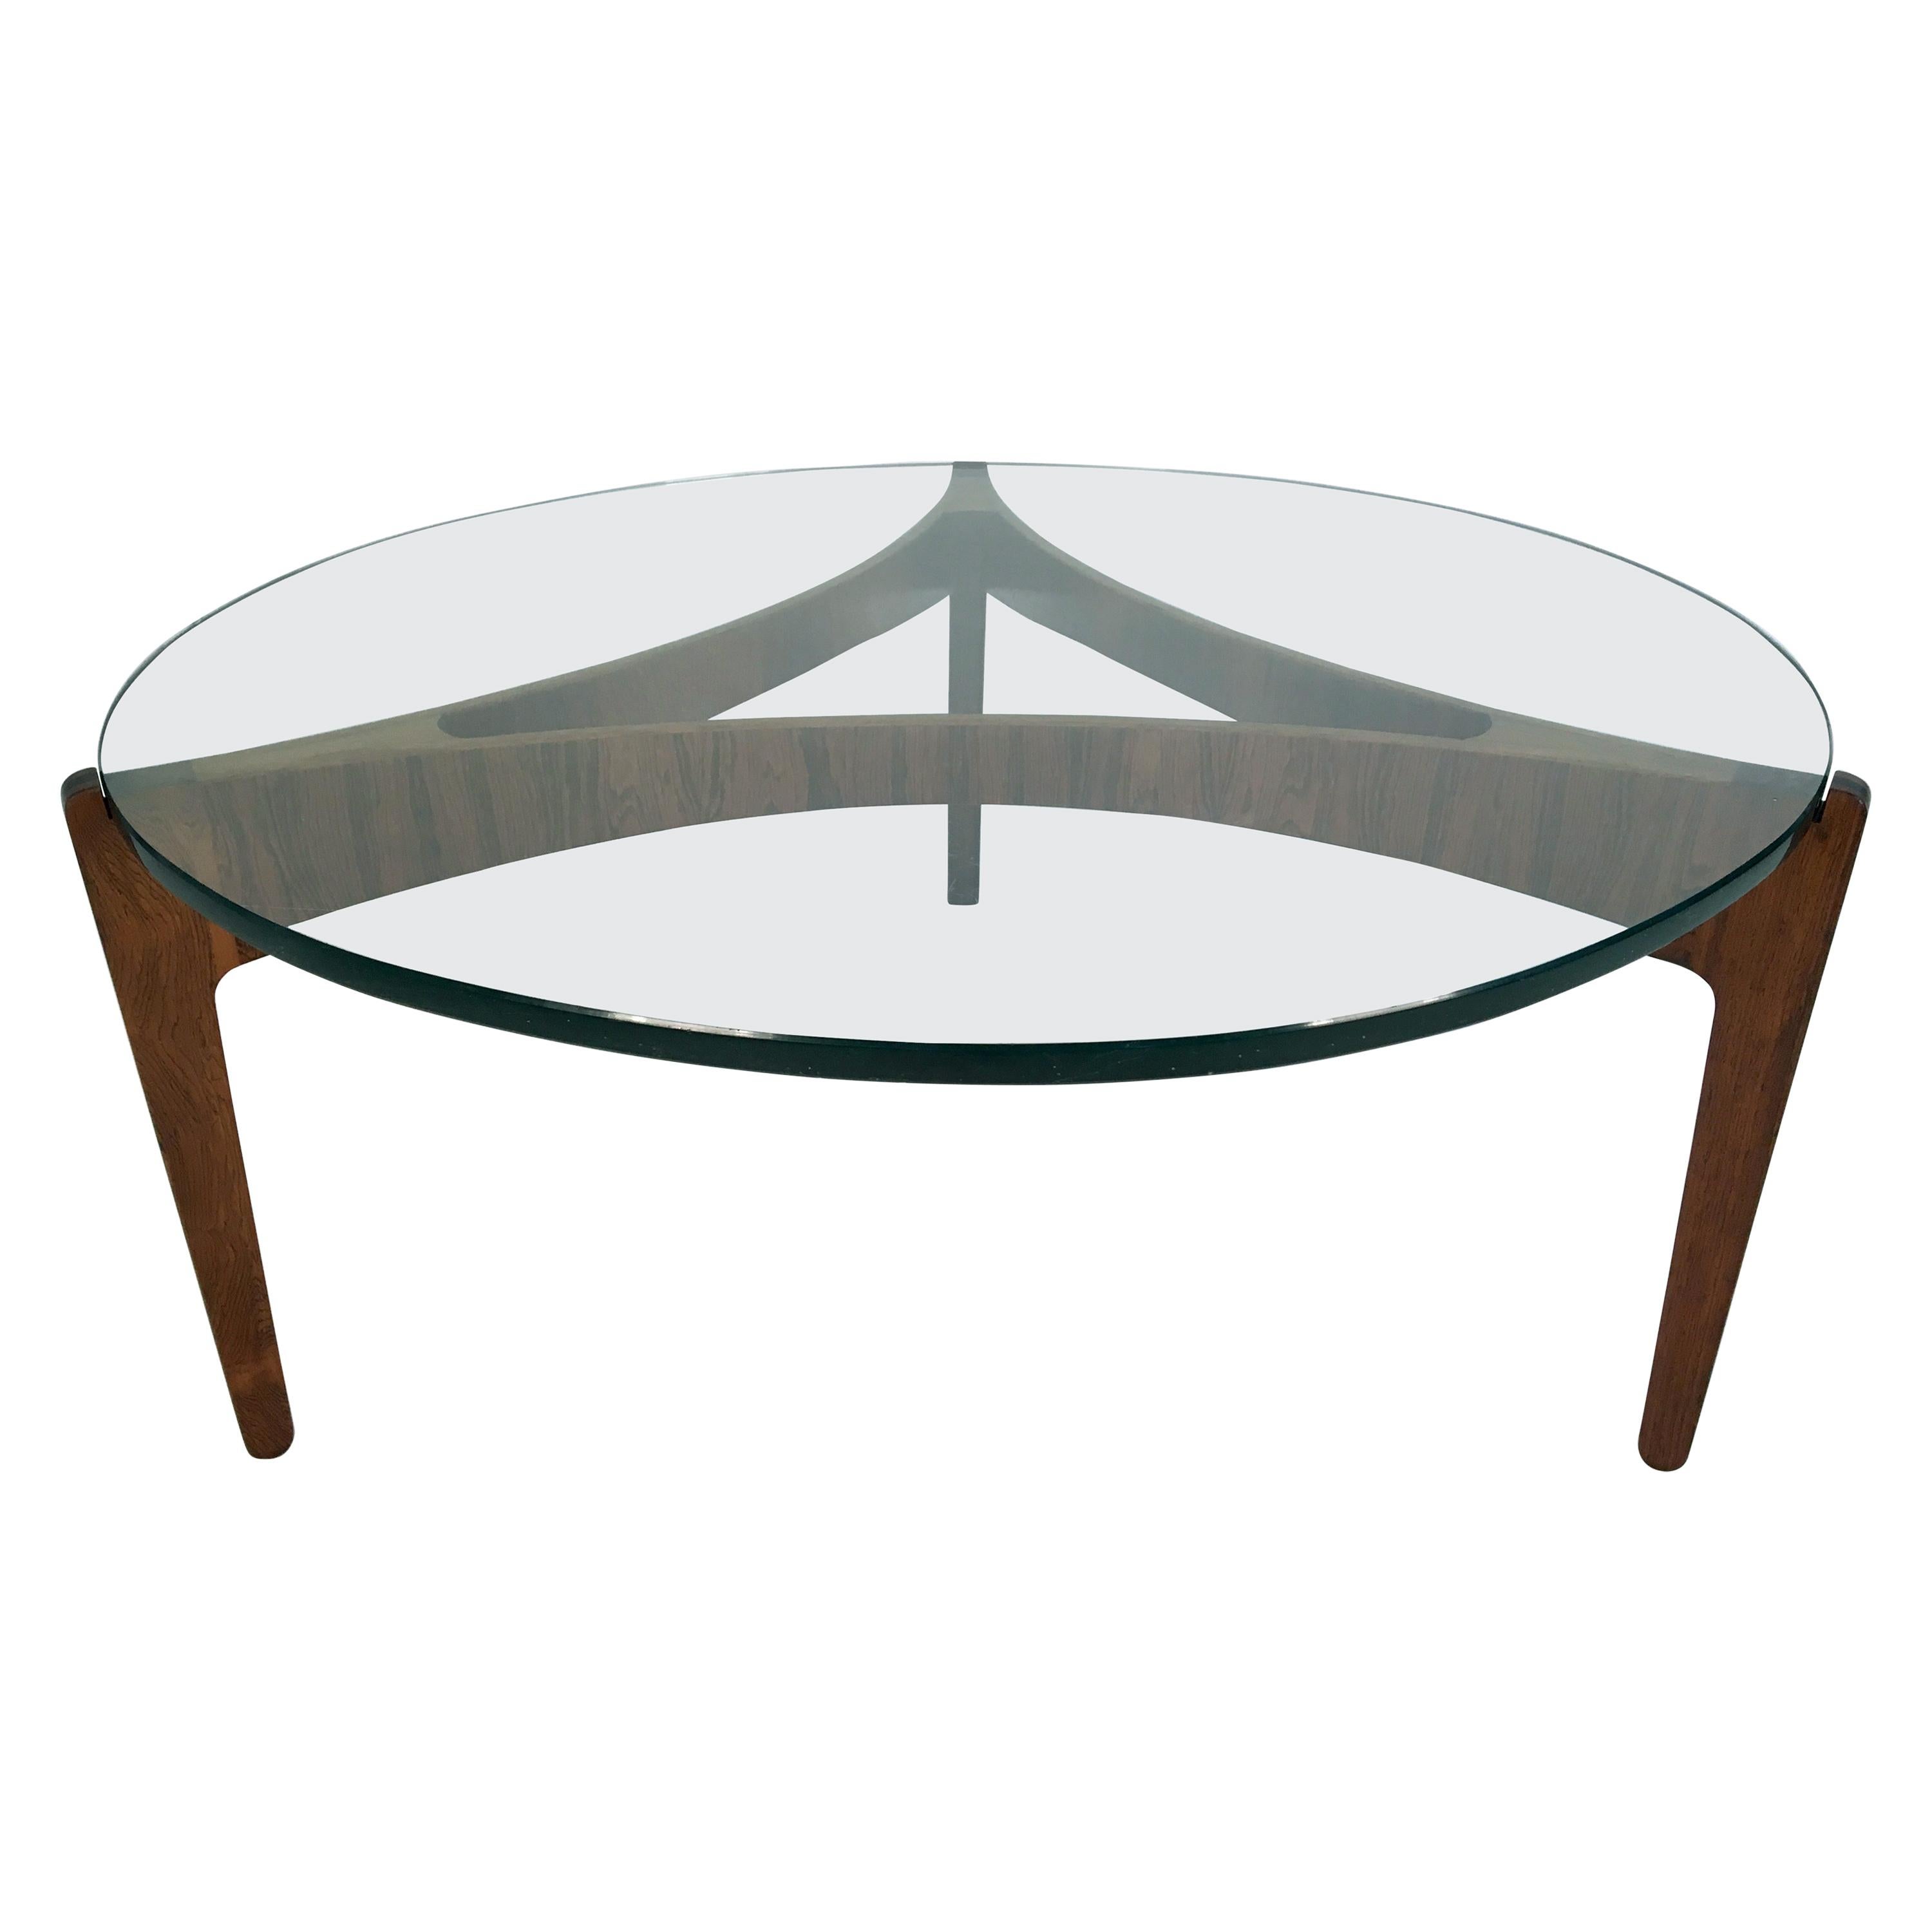 Midcentury Rosewood and Glass Coffee Table by S. Ellekaer, Denmark, circa 1960